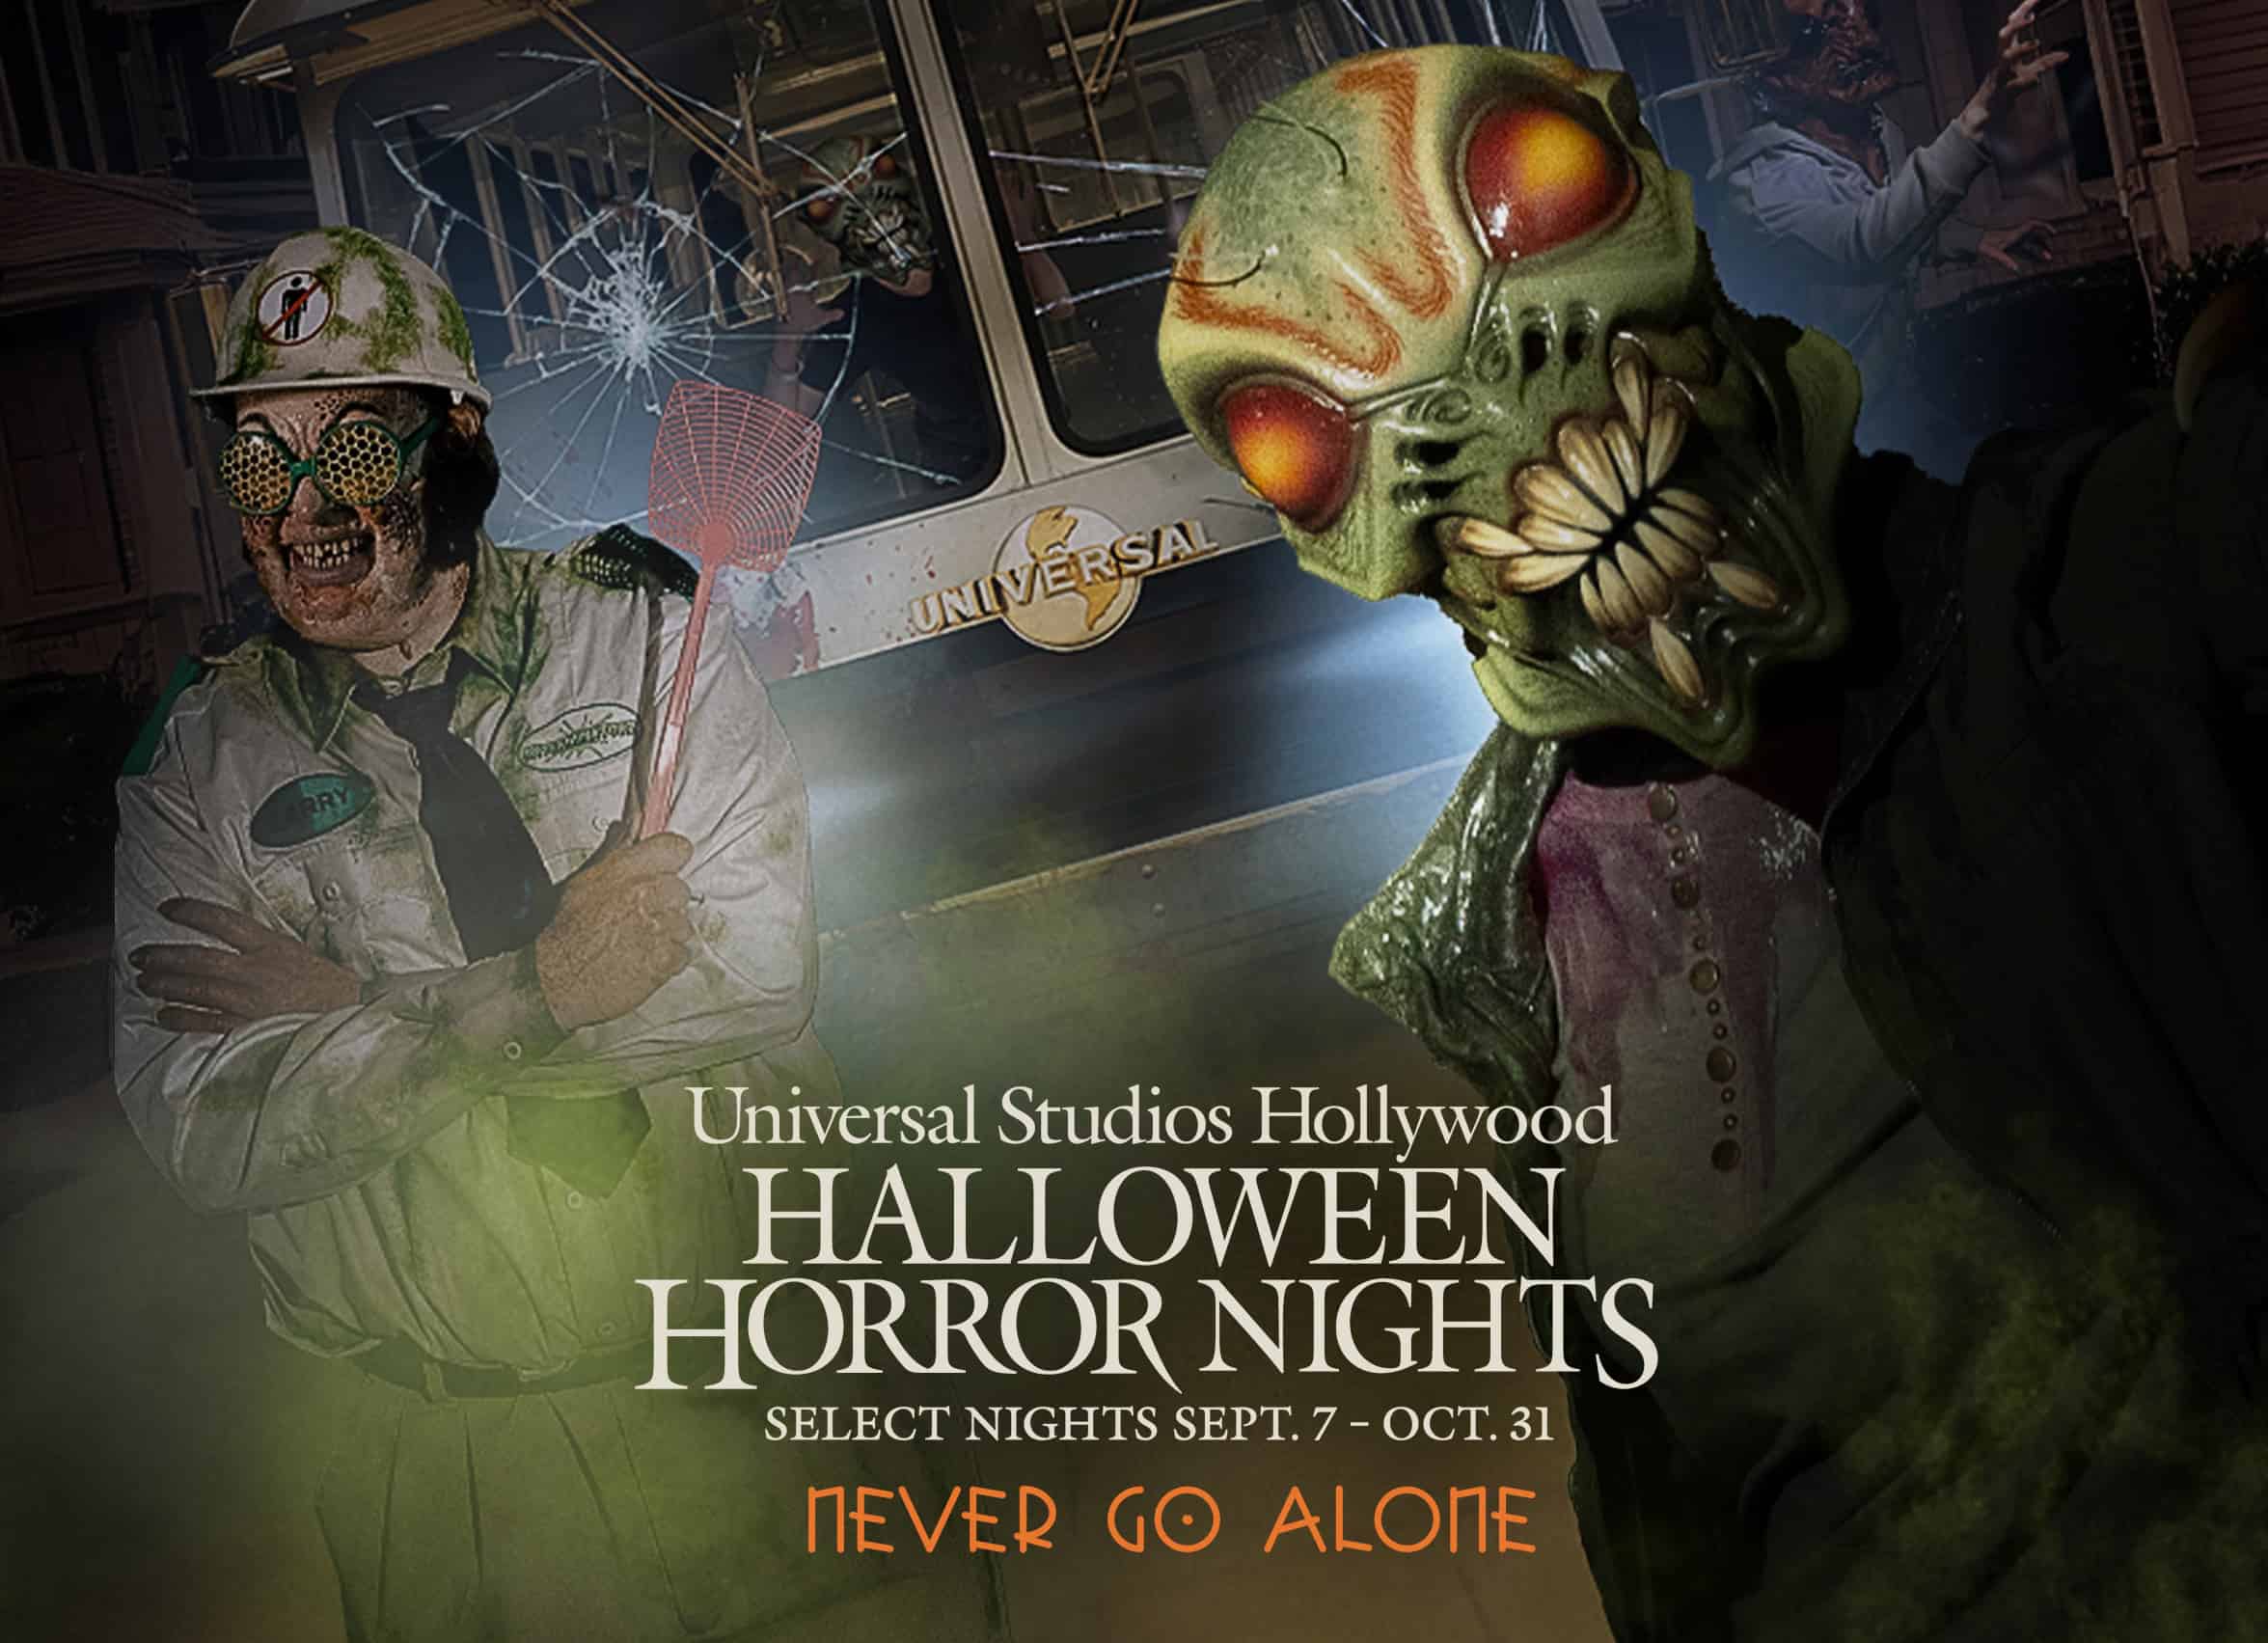 Get Your HHN Tickets for Universal Studios Hollywood Halloween Horror Nights!